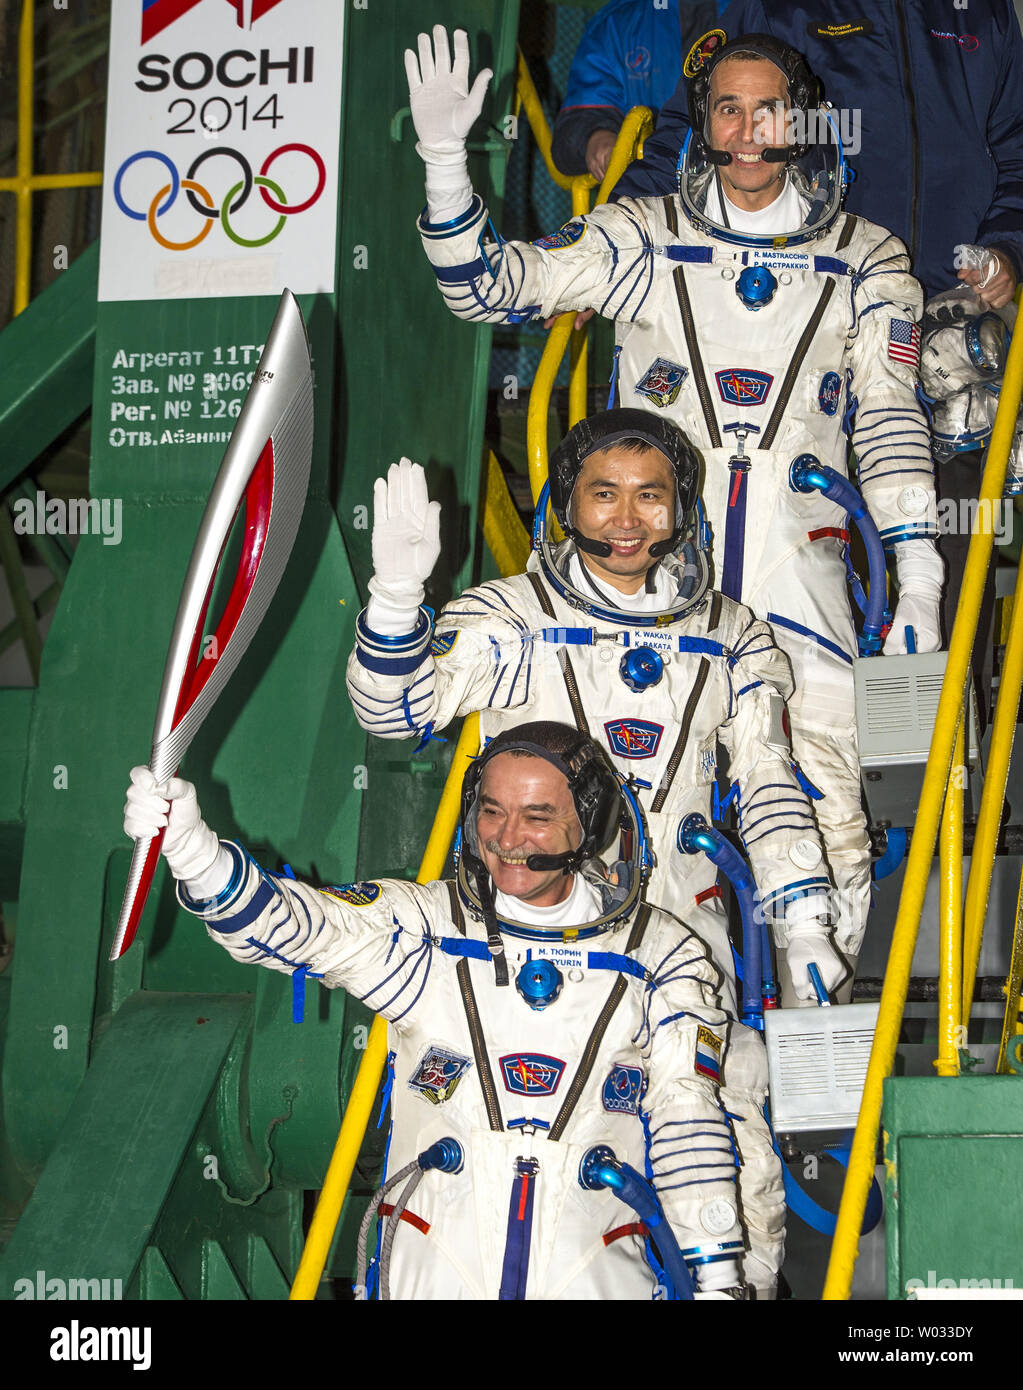 Expedition 38 Soyuz Commander Mikhail Tyurin of Roscosmos, holding the Olympic torch, Flight Engineer Koichi Wakata of the Japan Aerospace Exploration Agency, and, Flight Engineer Rick Mastracchio of NASA top, wave farewell prior to boarding the Soyuz TMA-11M rocket for launch at the Baikonur Cosmodrome in Kazakhstan, November 7, 2013.  The Olympic torch will have a four-day visit to the International Space Station.  Tyurin, Mastracchio, and, Wakata will spend the next six months aboard the International Space Station. UPI/Bill Ingles/NASA Stock Photo